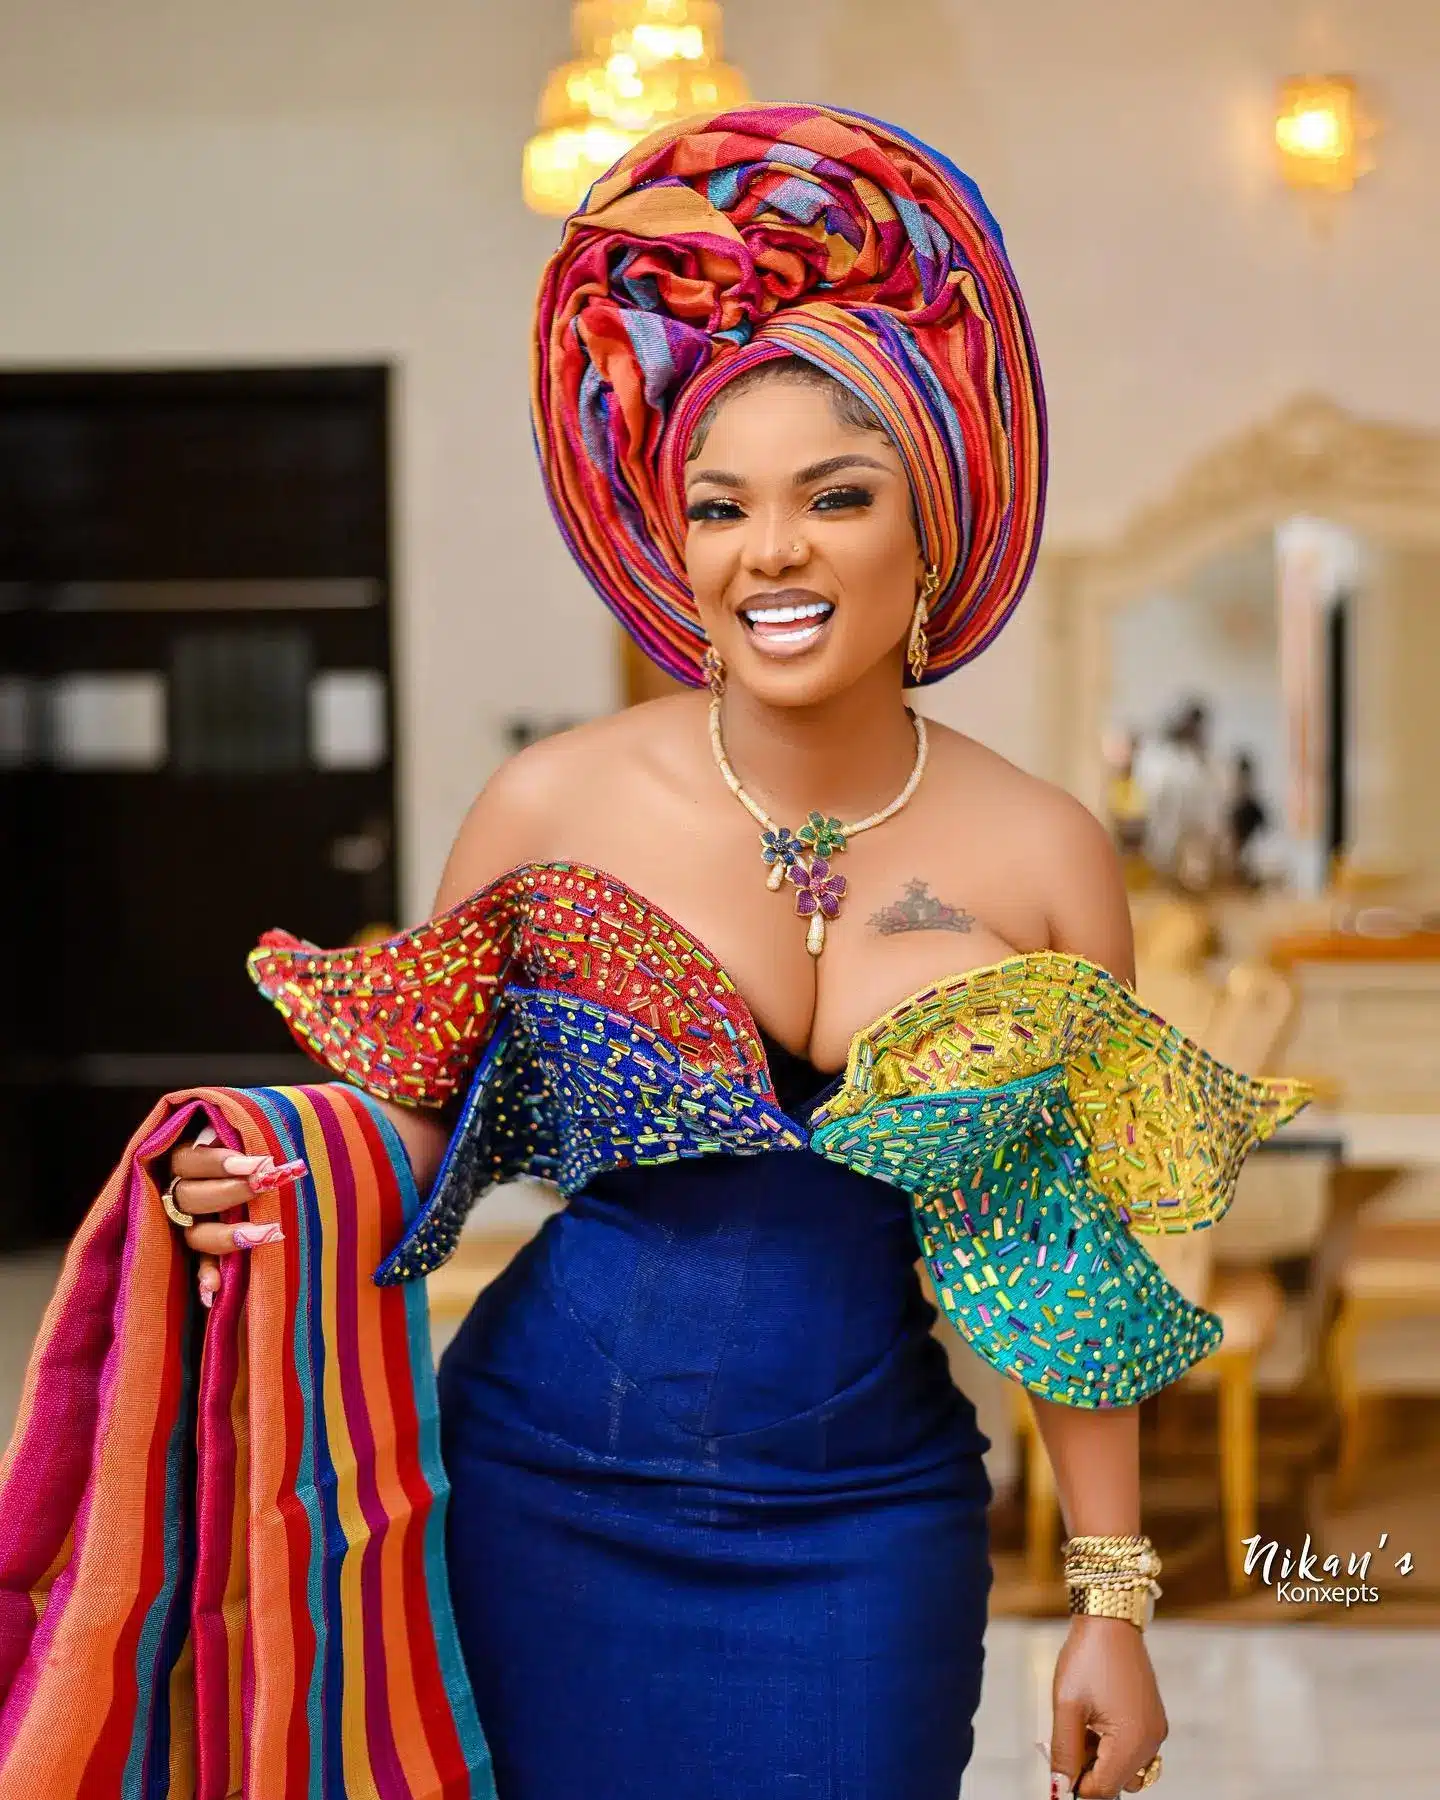 "I will show you the crazy side if me" - Laura Ikeji threatens Iyabo Ojo, reveals she fought her with a bottle